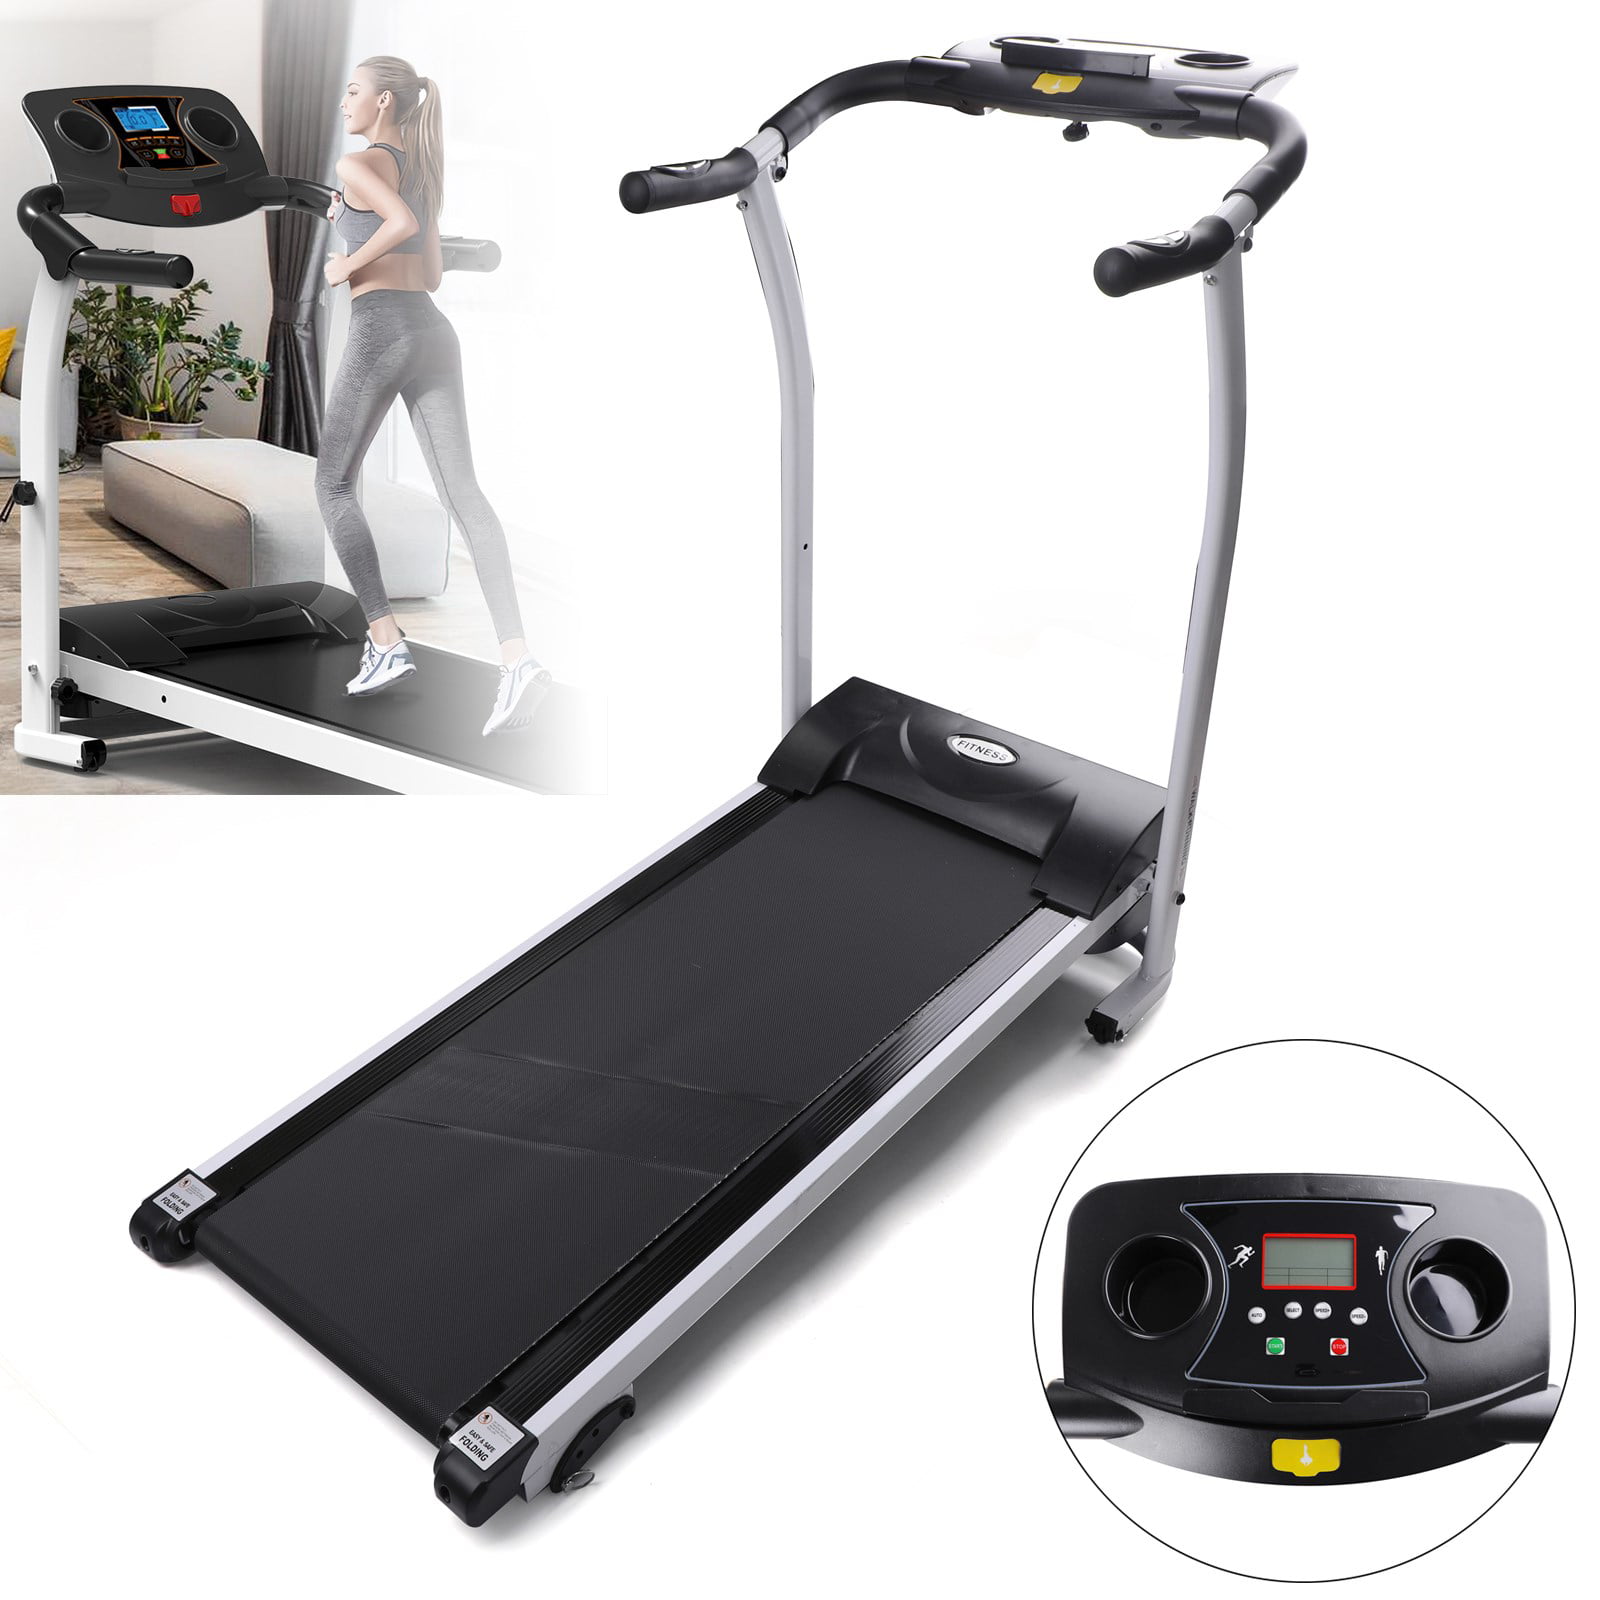 NEW 750w Motorized Electric Treadmill Running Machine height adjustable foldable 